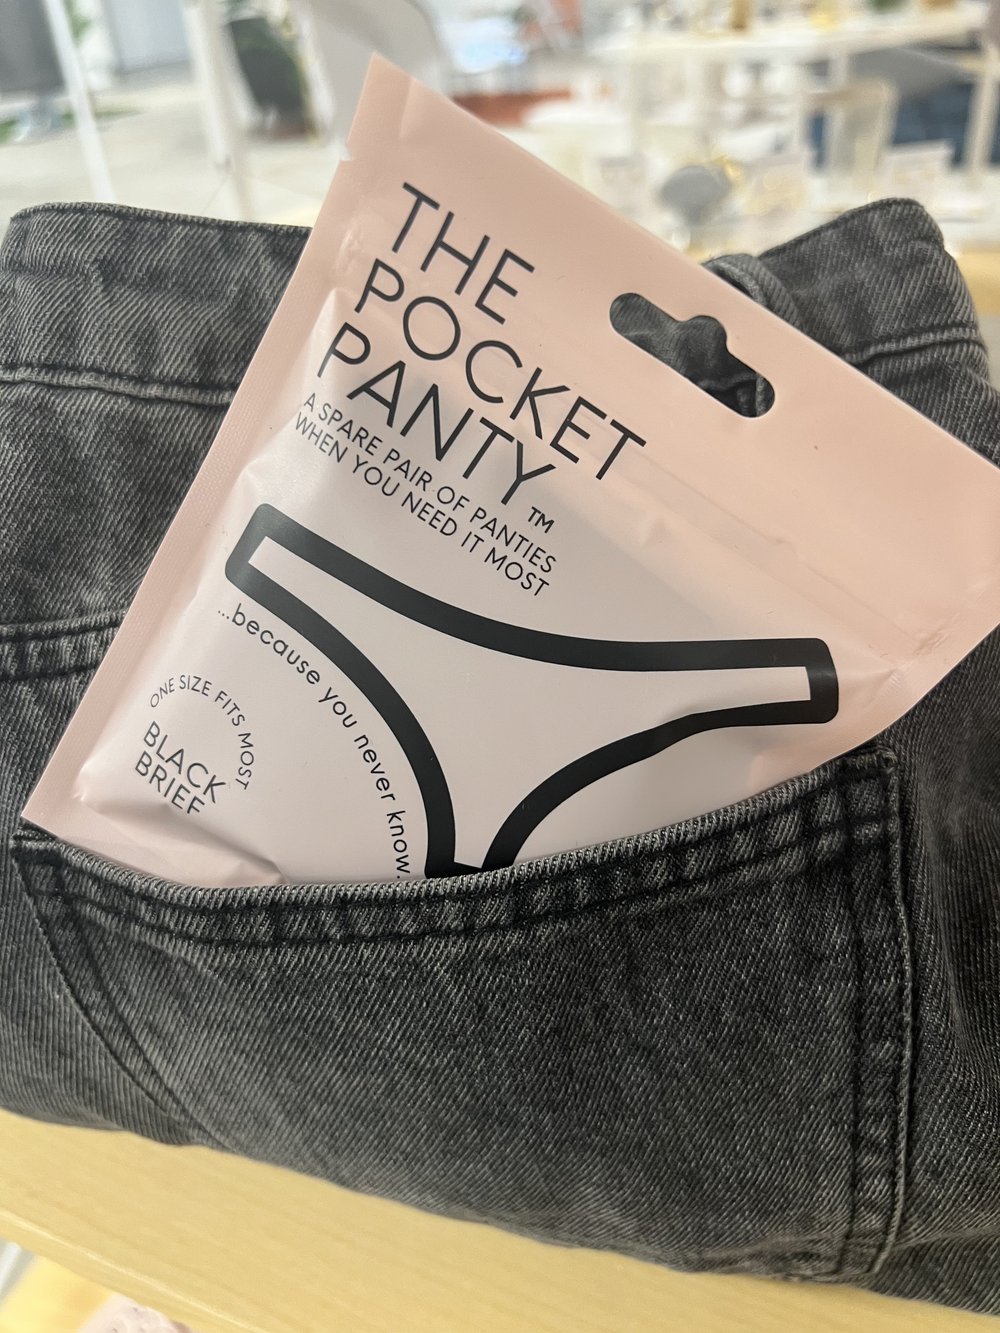 The Pocket Panty — We've Got Your Booty Covered!